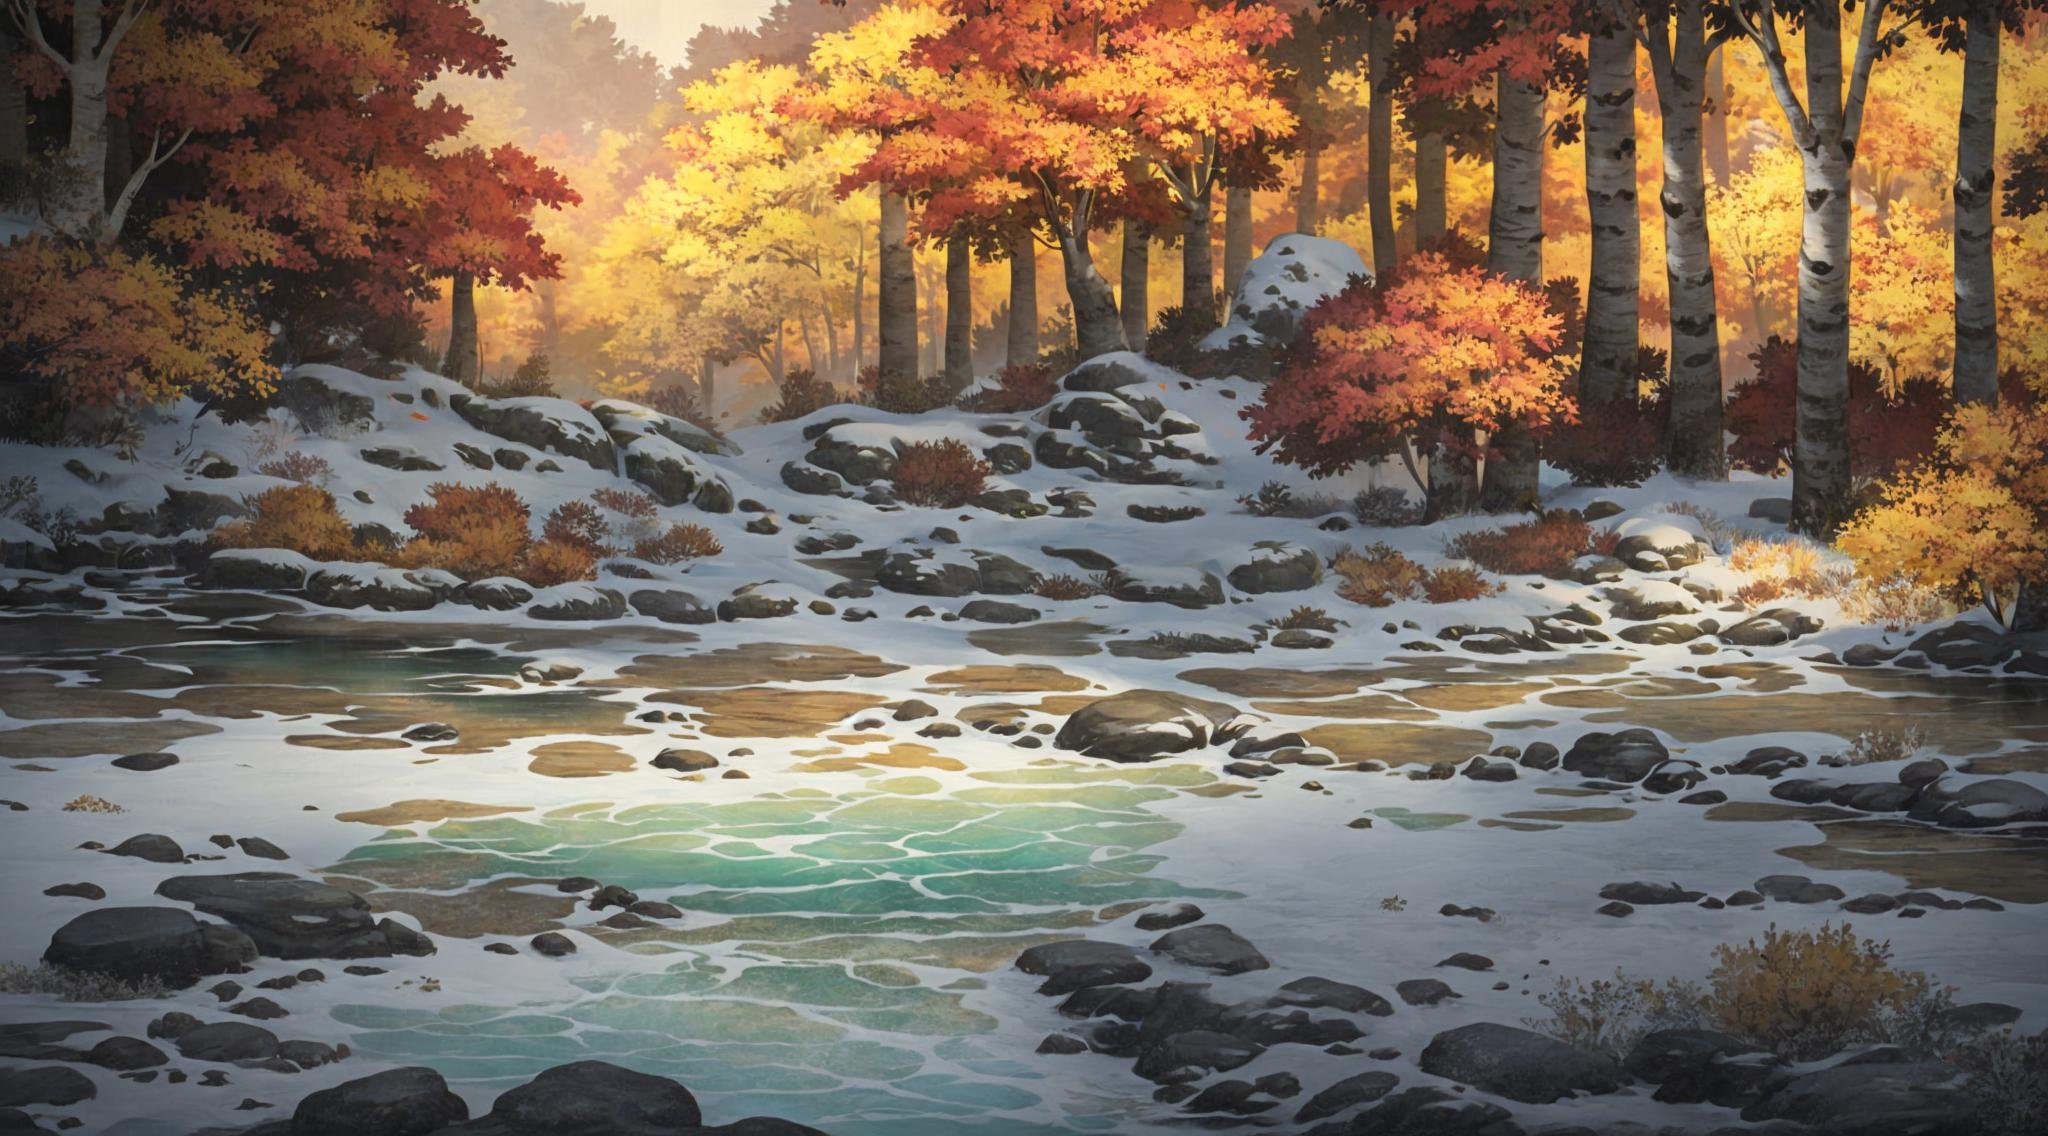 Concept art, horizontal scenes, horizontal line composition, scenery, no humans, tree, nature, outdoors, forest, water, rock, leaf, autumn leaves<lora:hengban:0.8>,